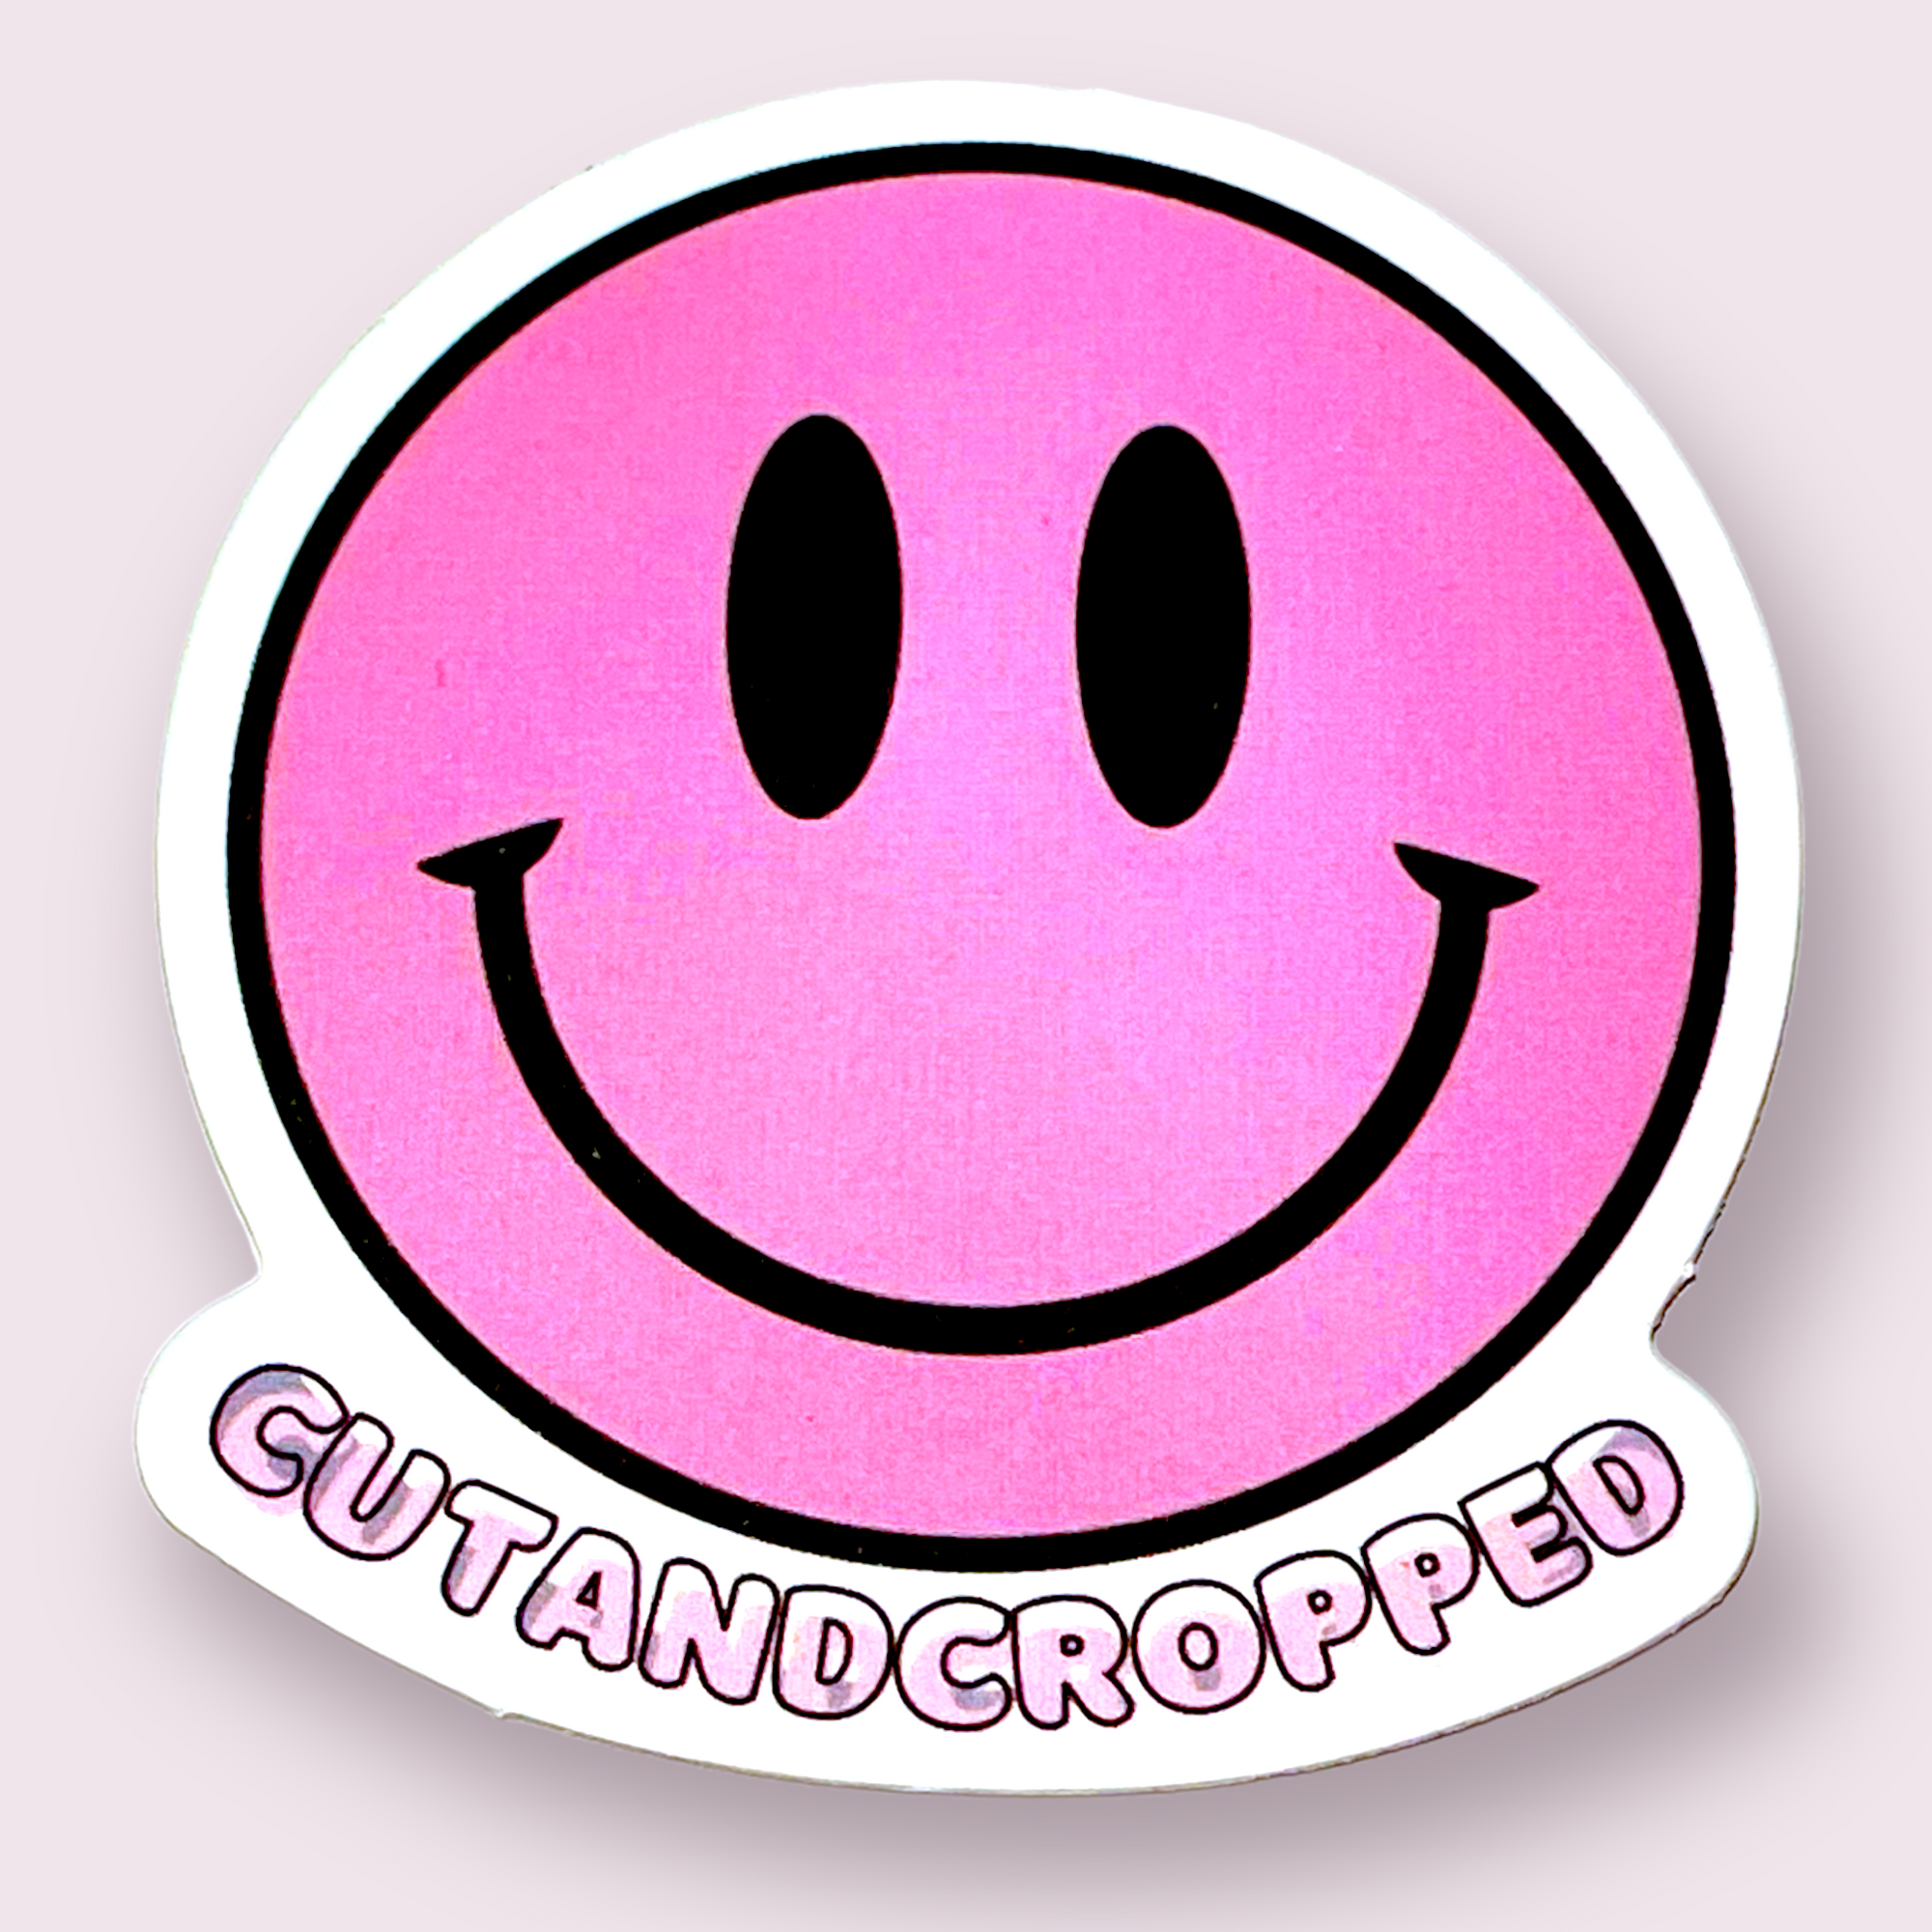 Cutandcropped Pink Happy Face Sticker